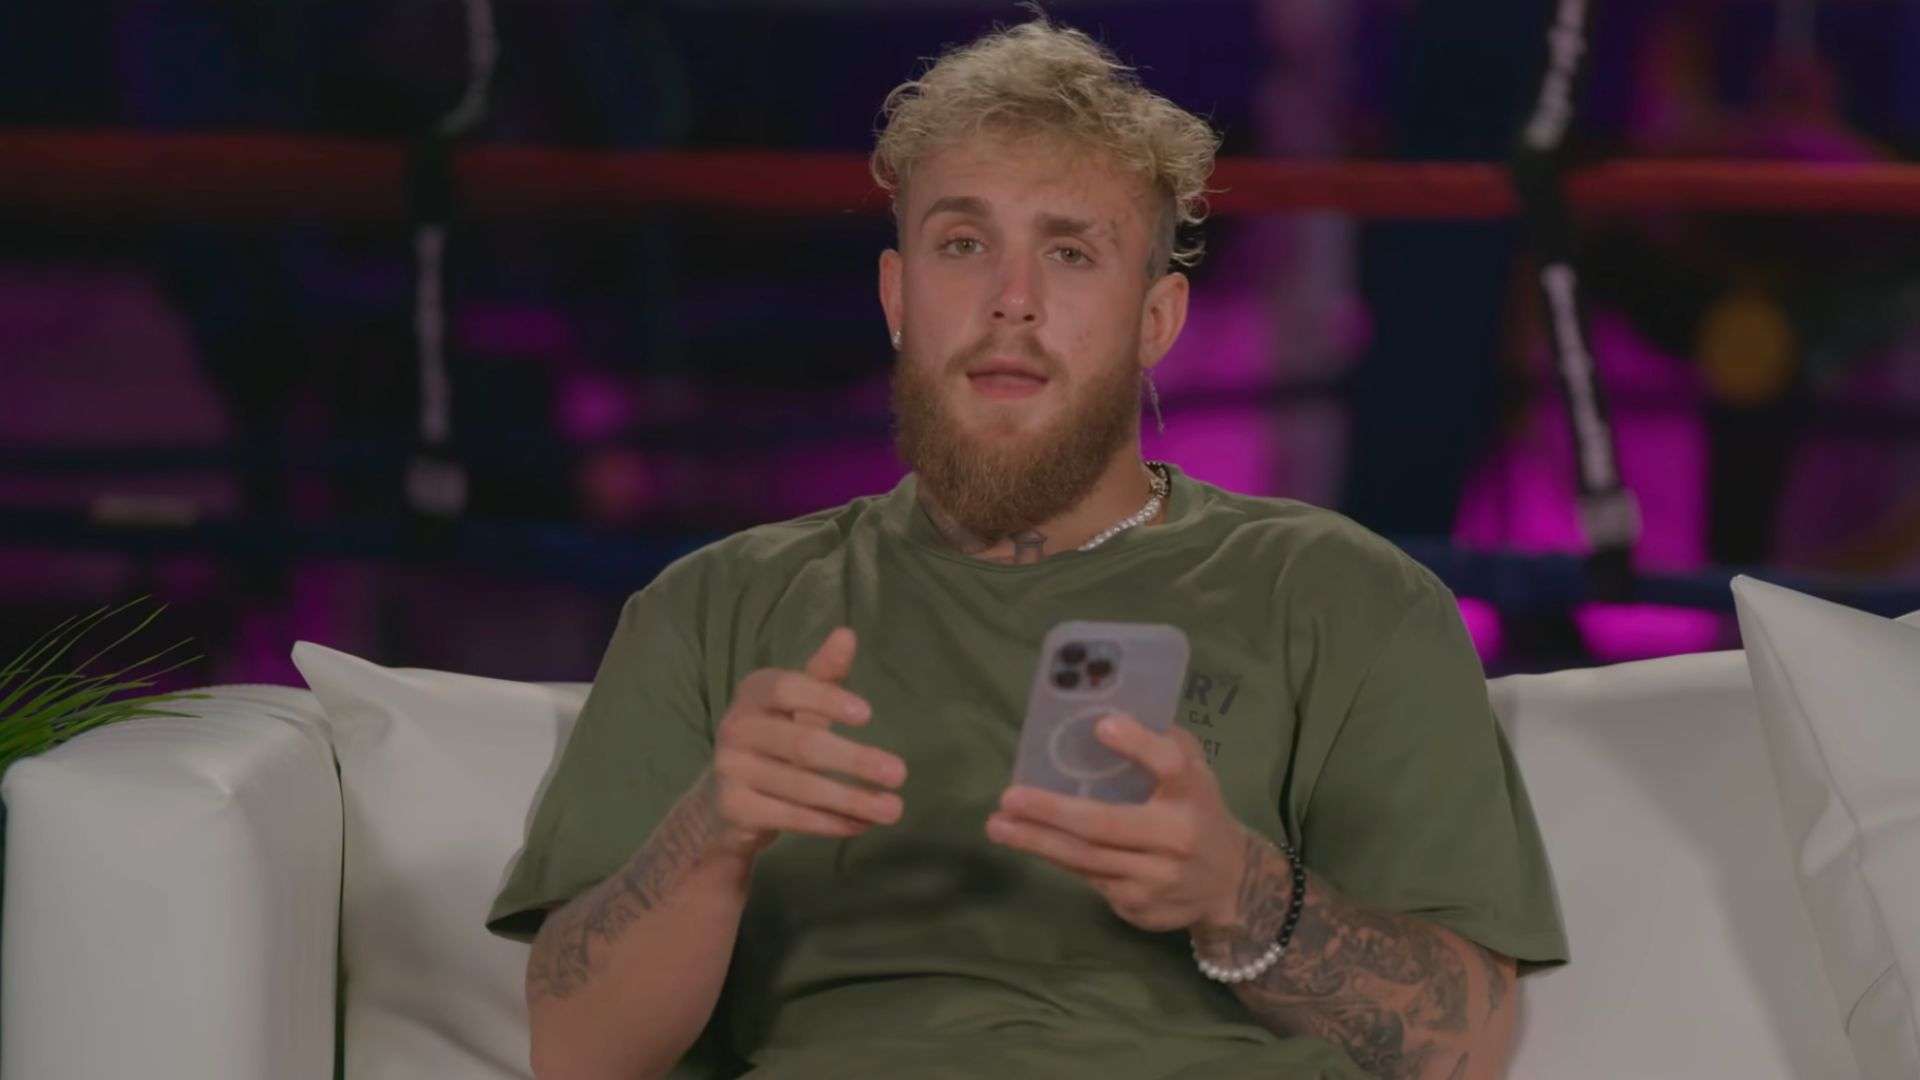 Jake Paul sat on couch talking to camera while holding phone